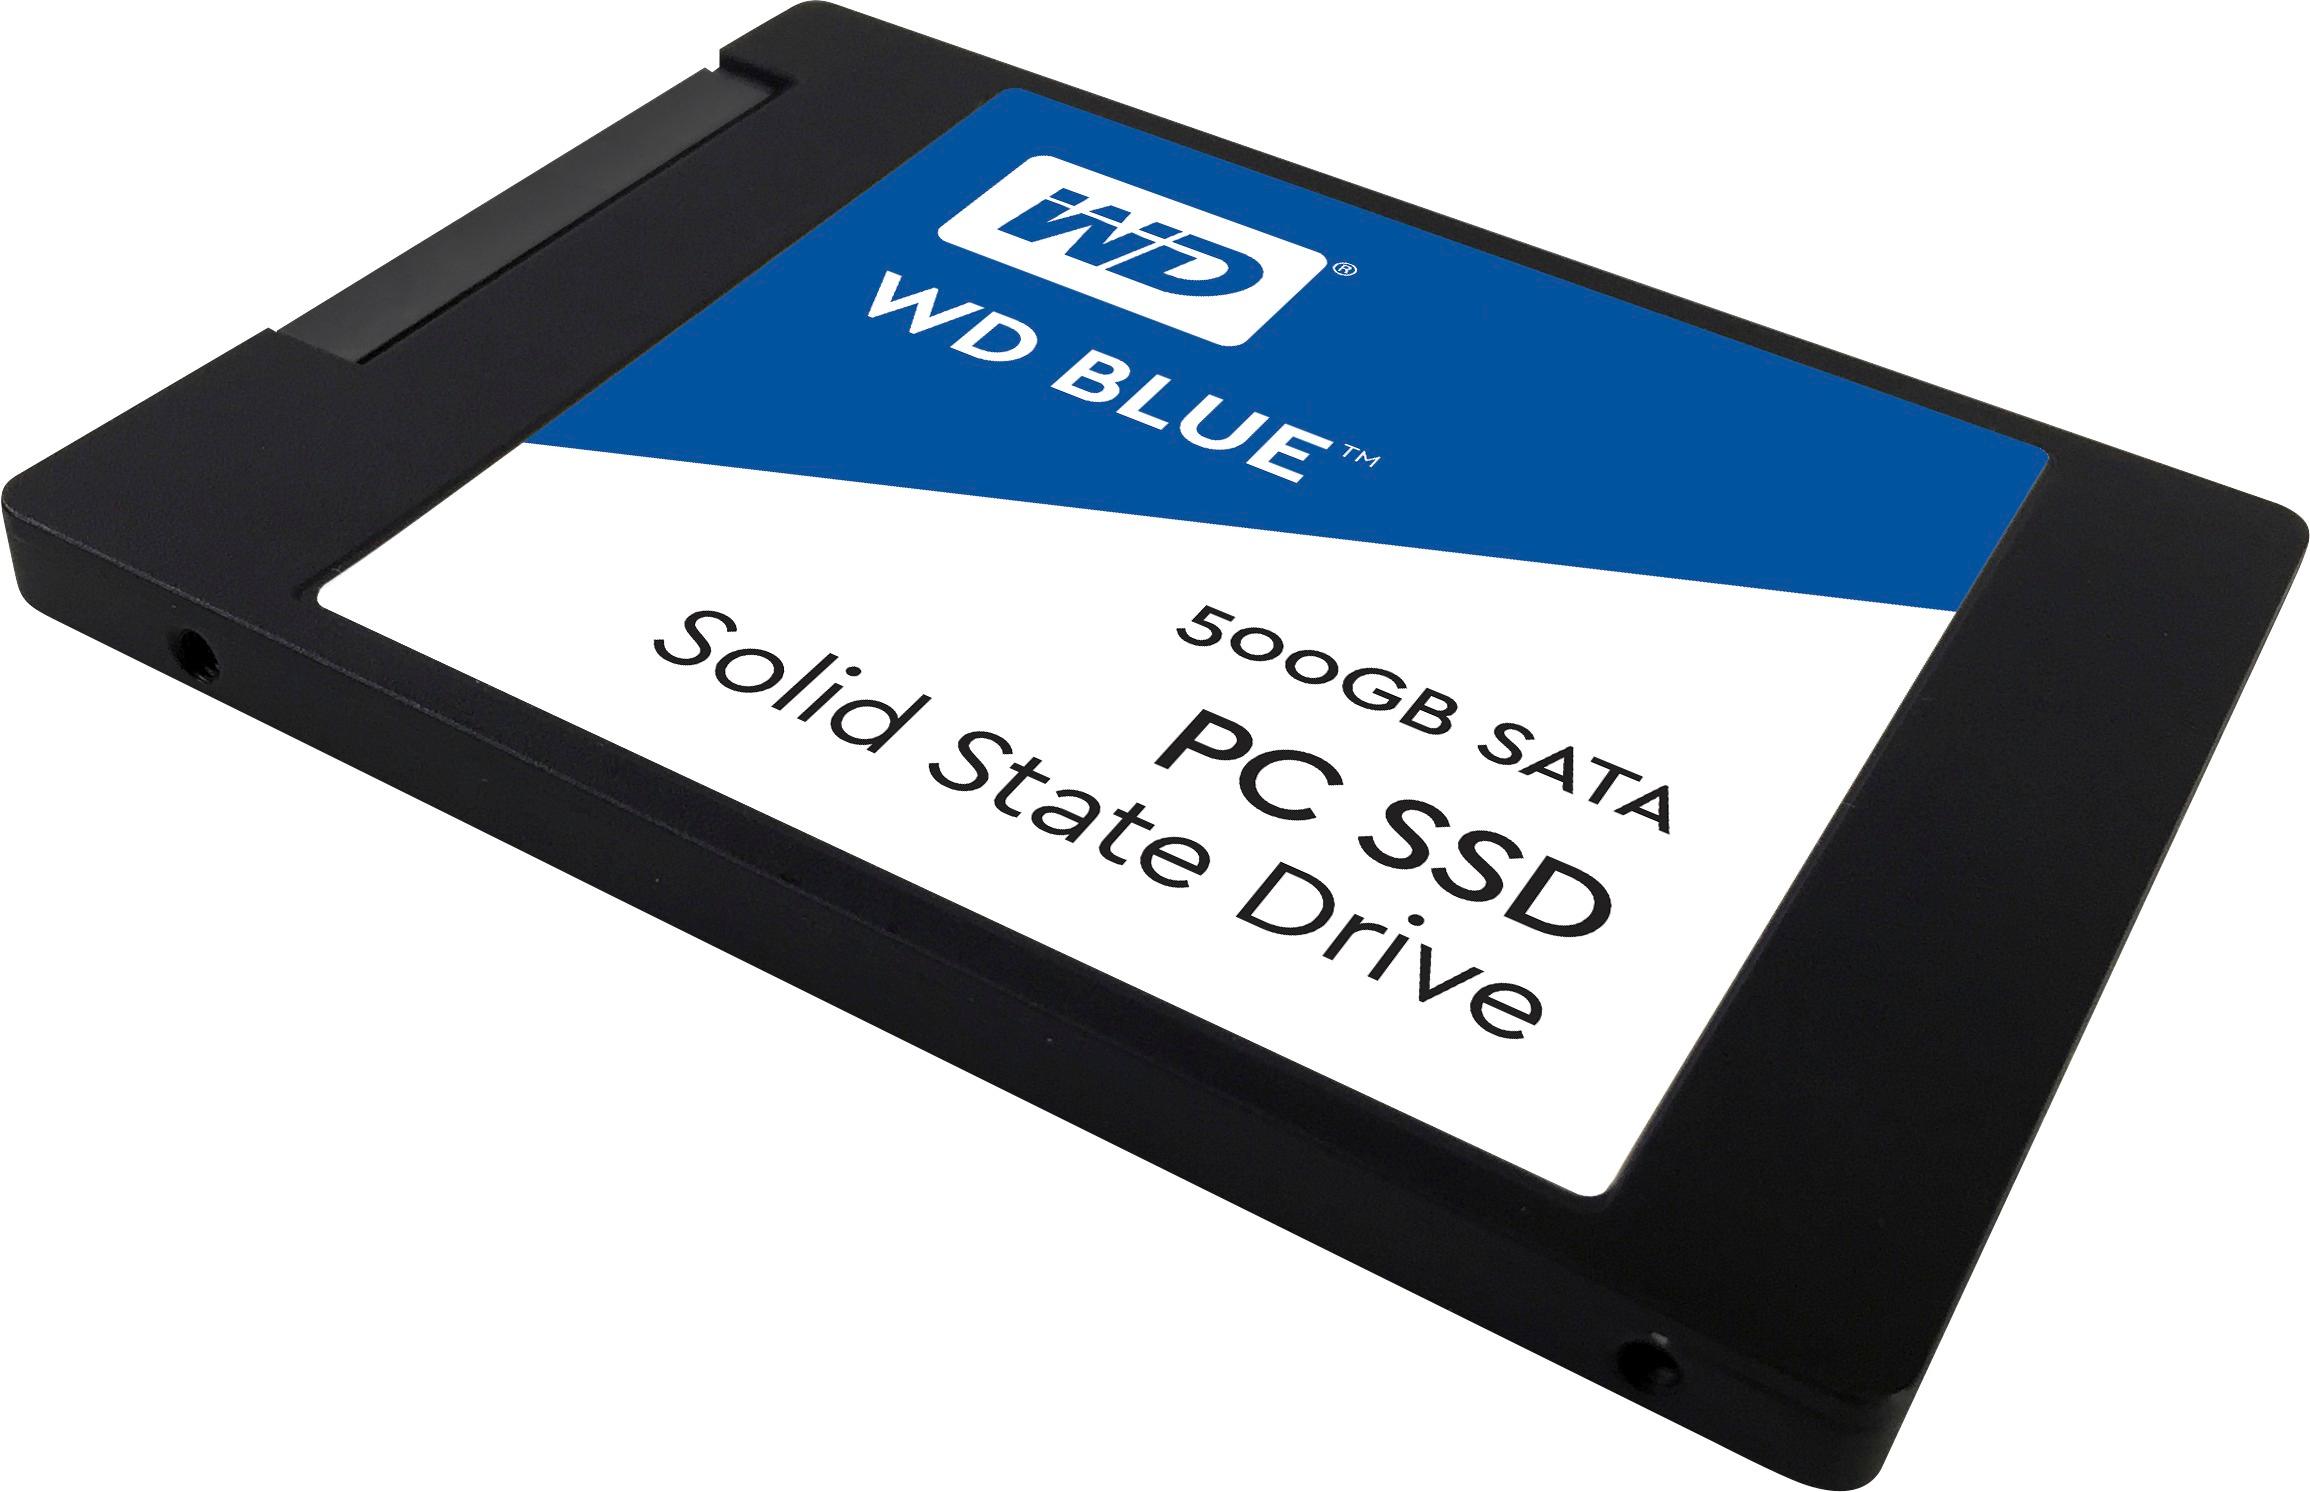 Why Solid State Drives Are Not Defragmented